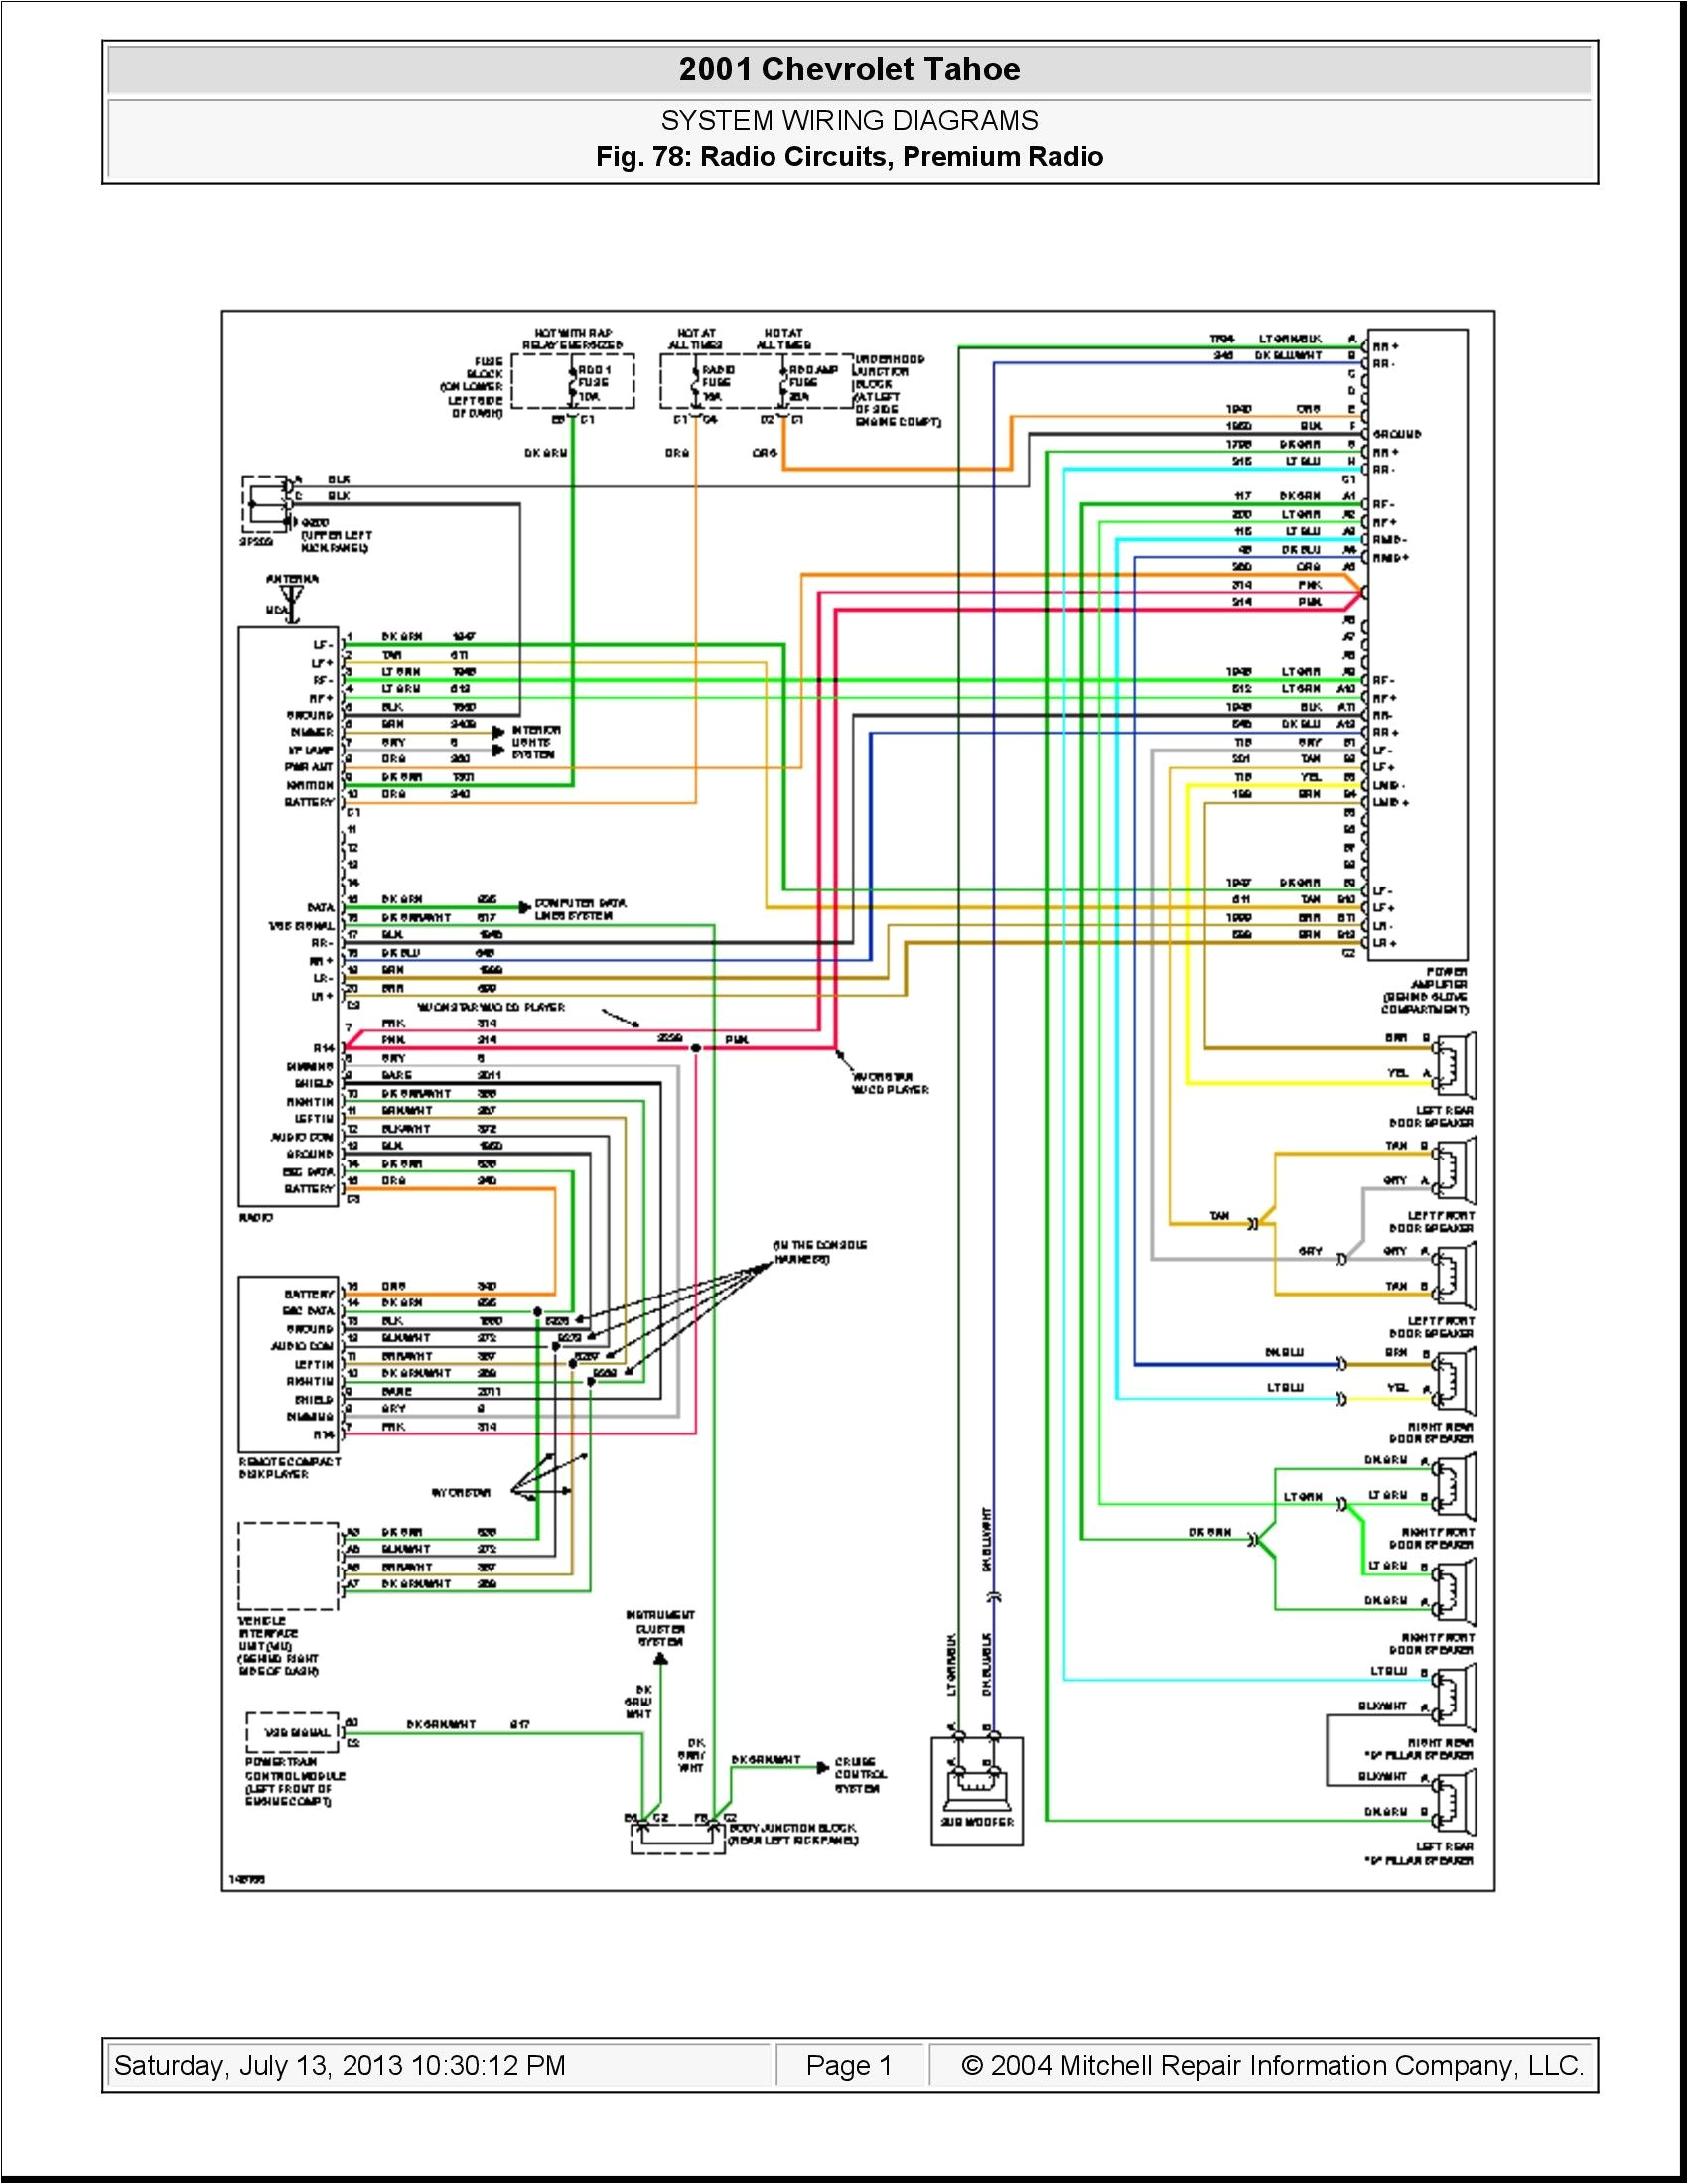 2001 Chevy Suburban Stereo Wiring Diagram 2008 Chevy Wiring Diagrams Pro Wiring Diagram